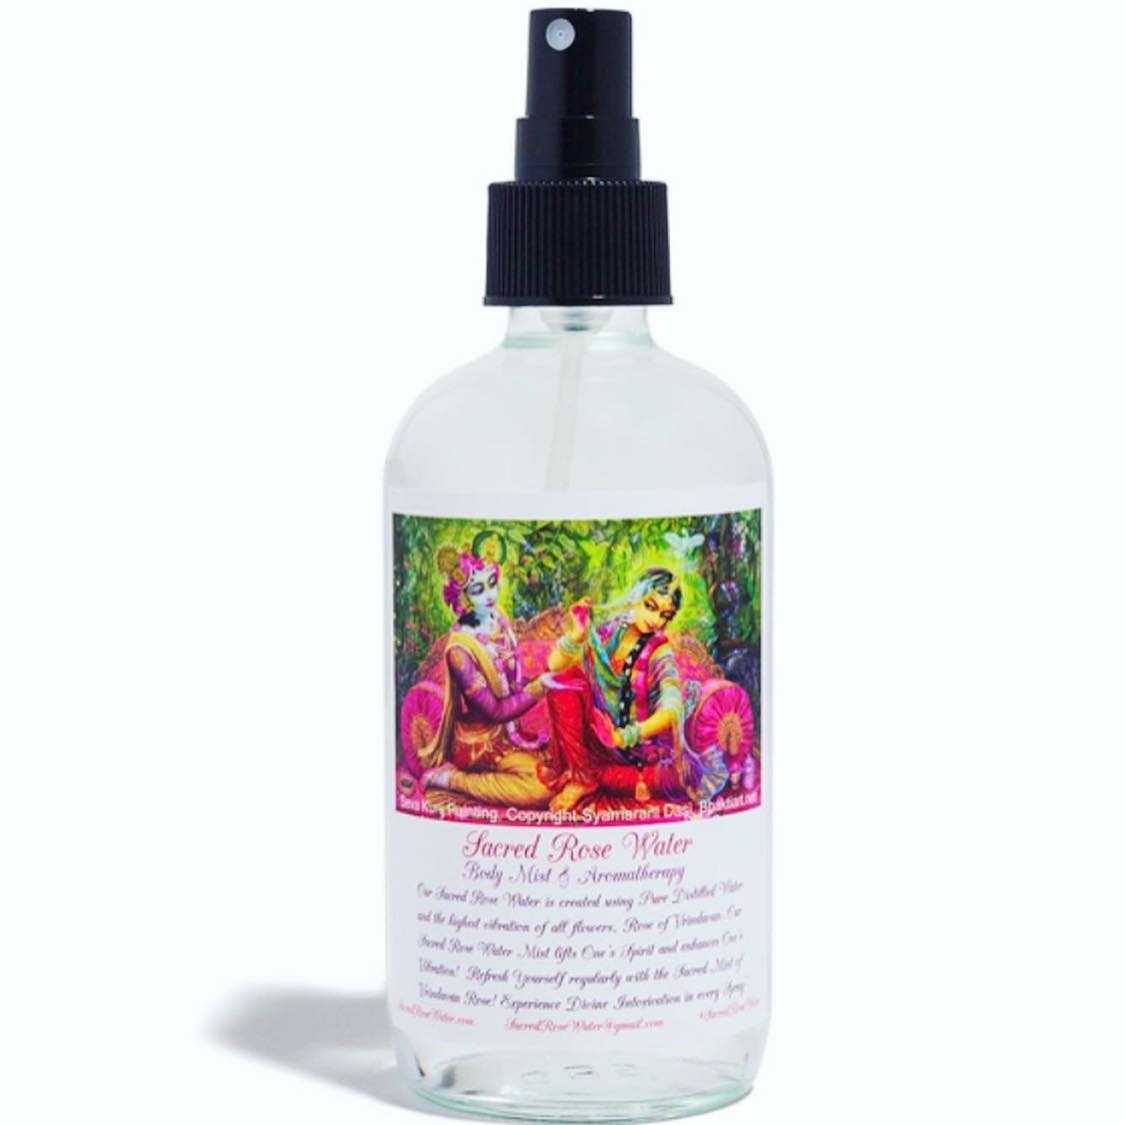 "The Ultimate Sacred Rose Water Review: What You Need to Know"